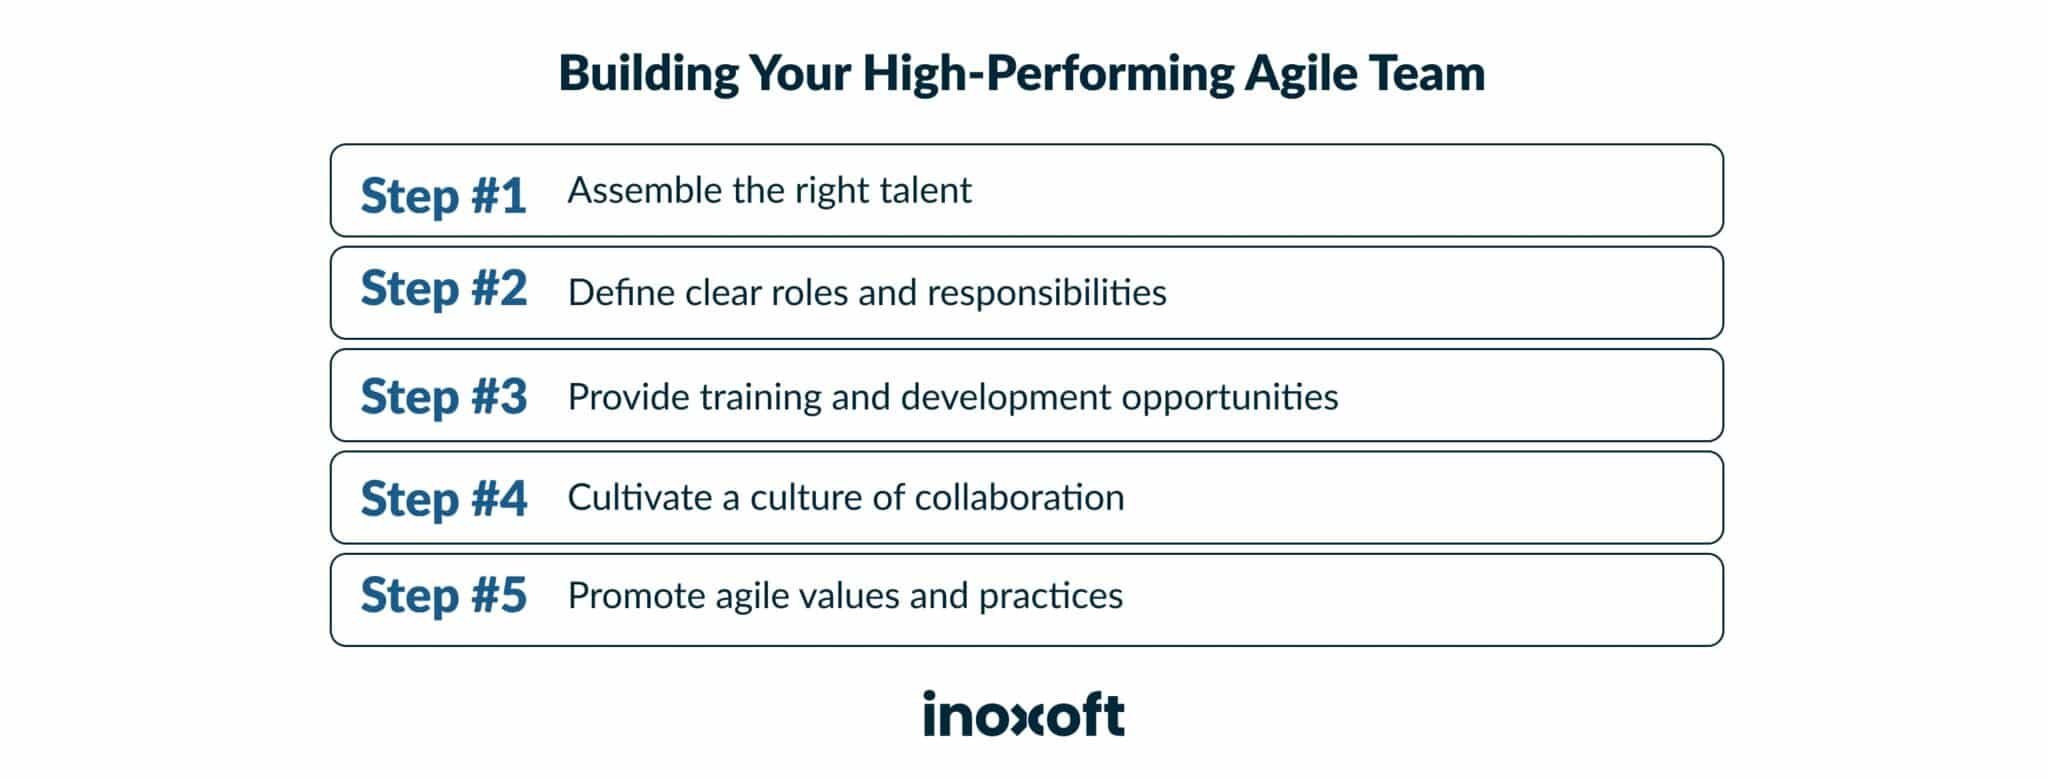 Steps of Building Your High-Performing Agile Team